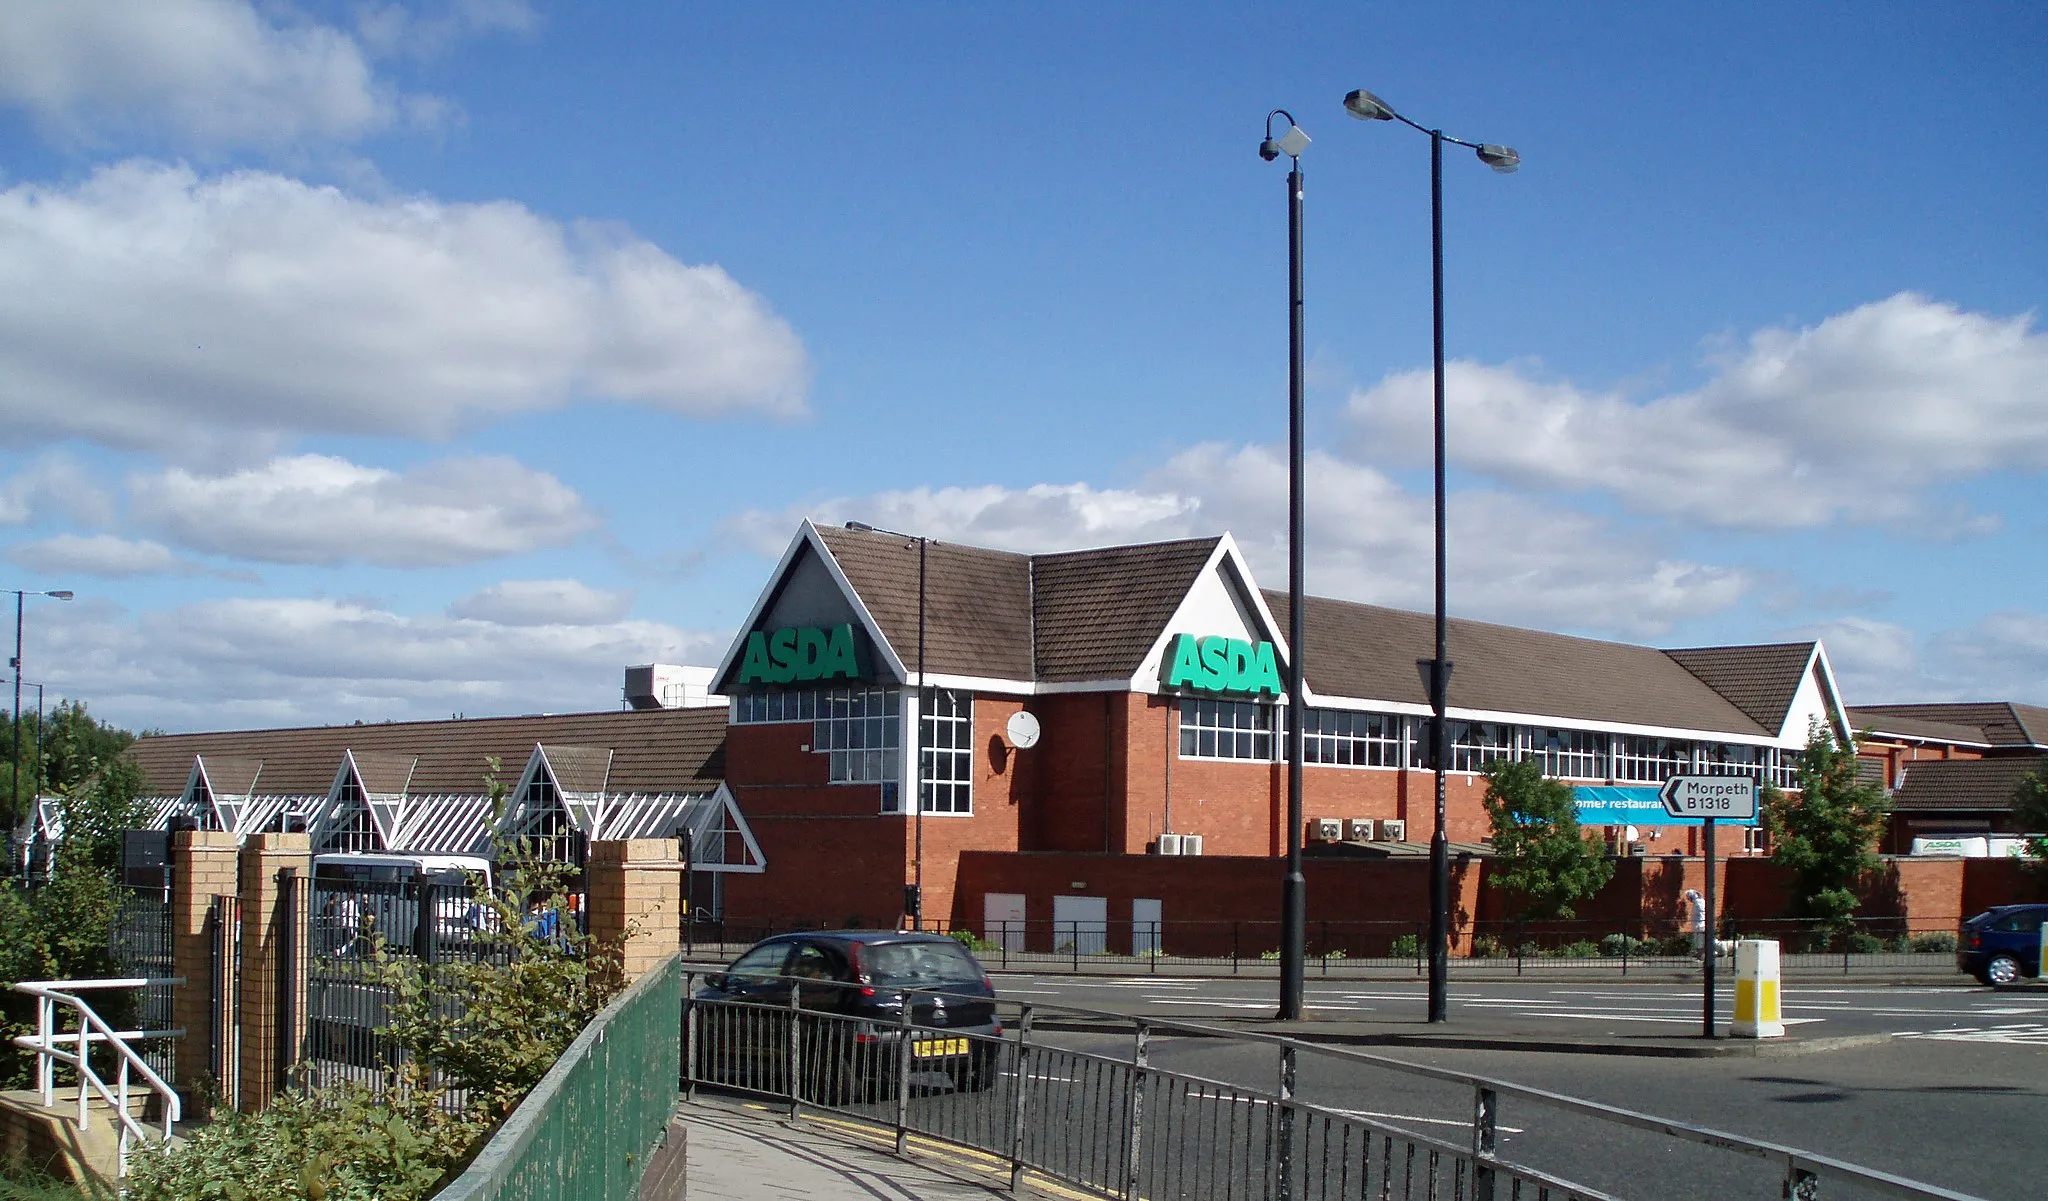 Photo showing: This is a photograph of the ASDA Gosforth superstore, as seen from the Great North Road, Gosforth, Newcastle upon Tyne, England